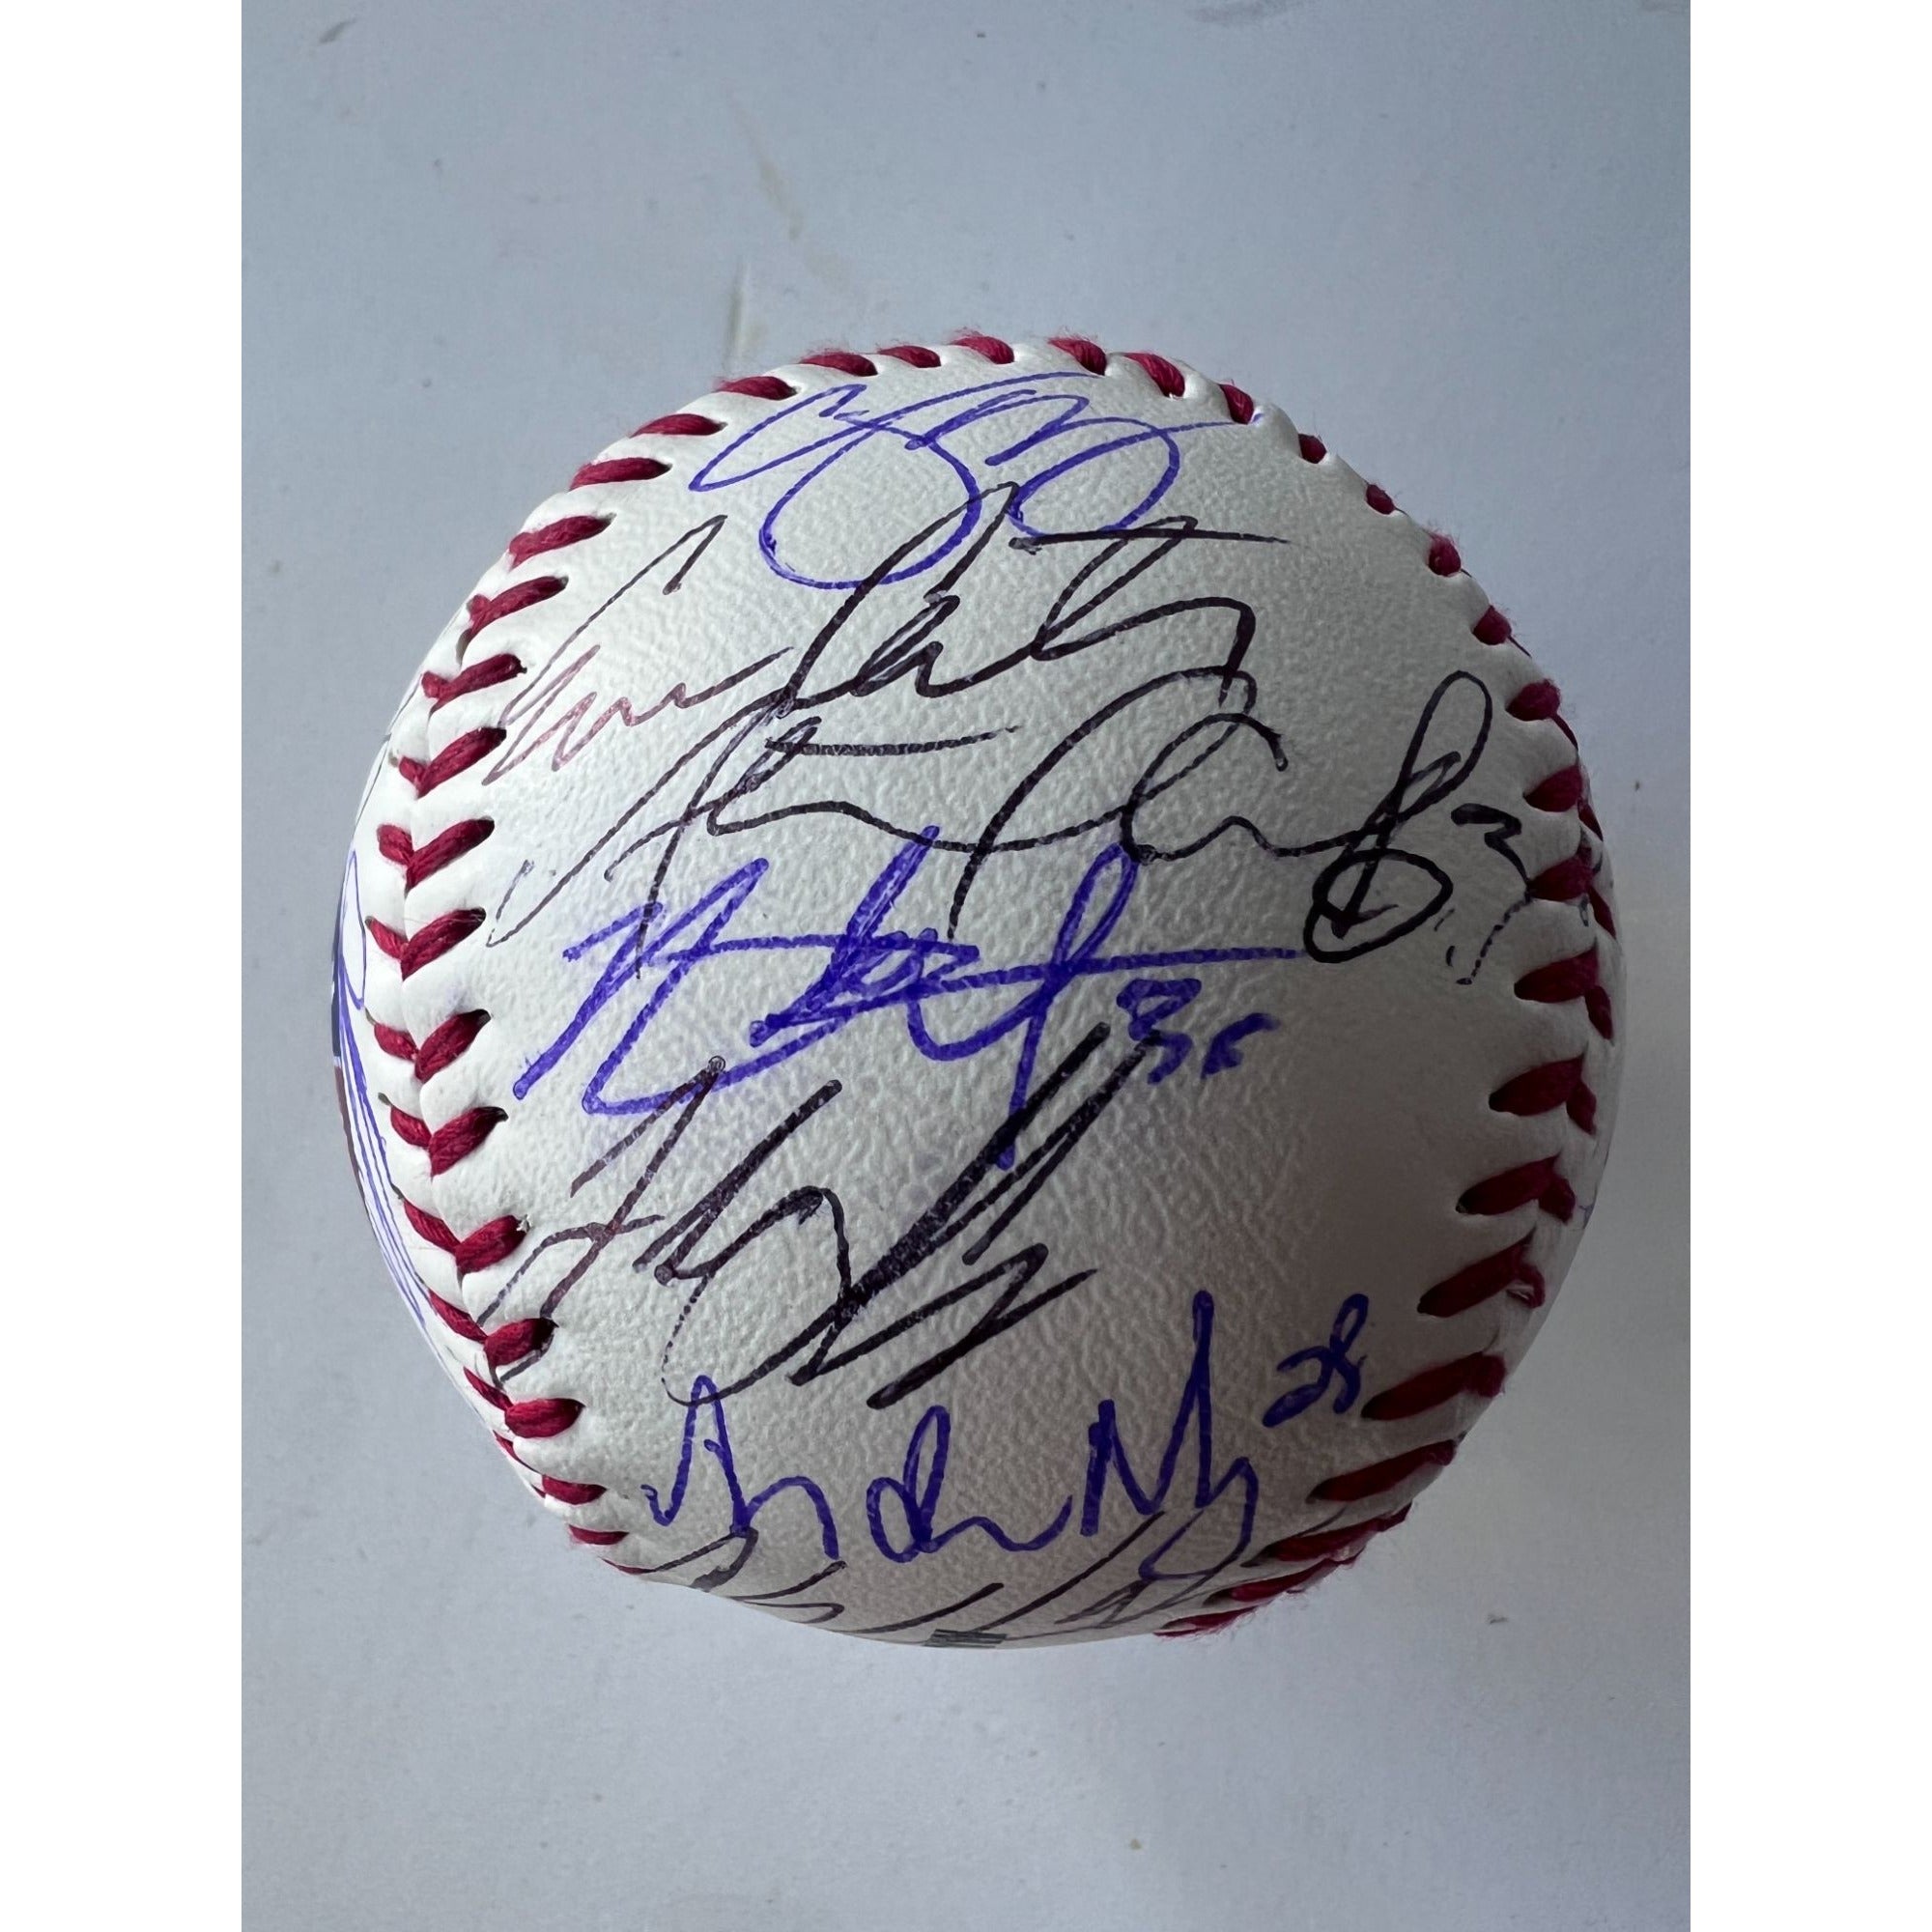 Texas Rangers 2022 team signed Corey Seager, Adolis Garcia, 25 signatures Rawlings MLB baseball signed with proof